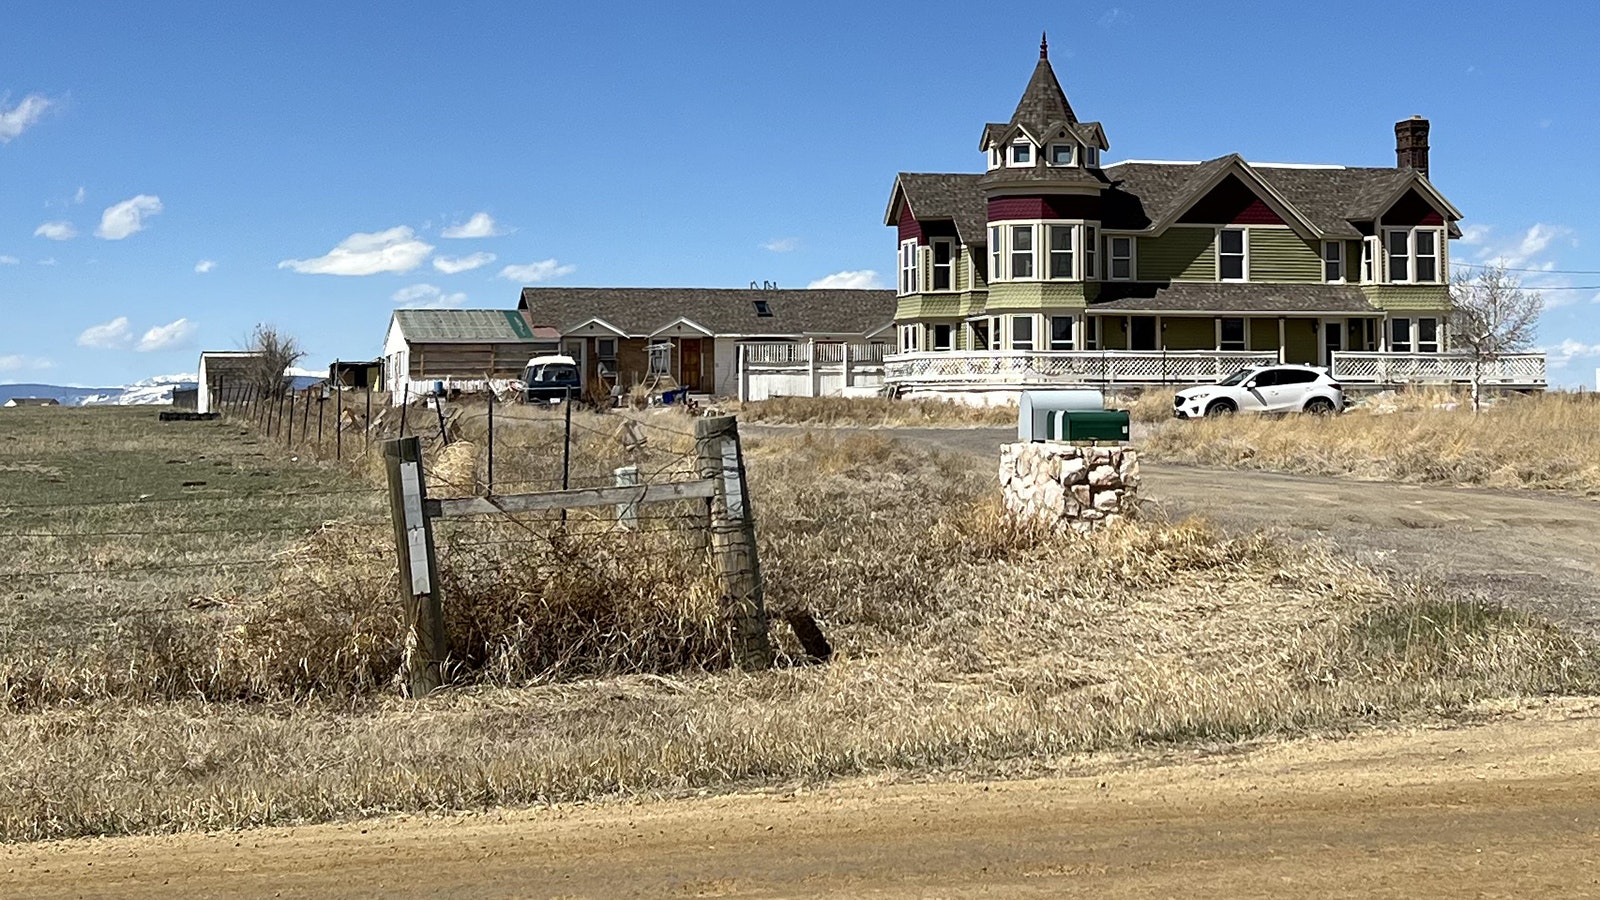 The Holliday House mansion was built in 1878 in downtown Laramie. In 1978, it was moved to a three-acre property west of town.